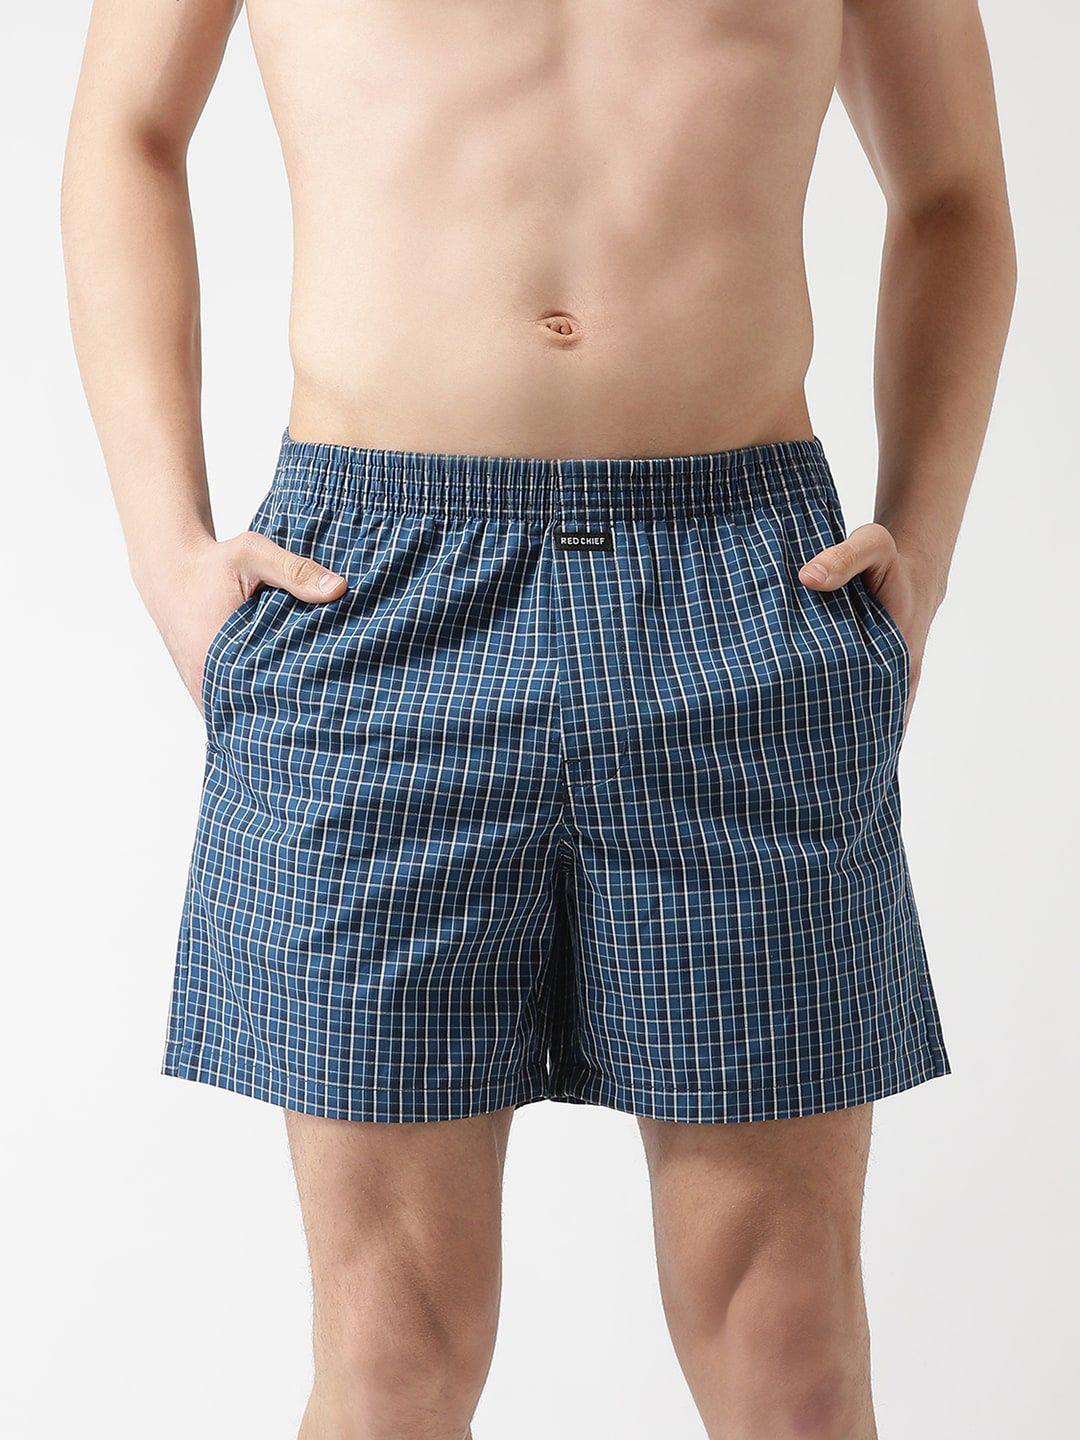 red chief checked cotton boxers